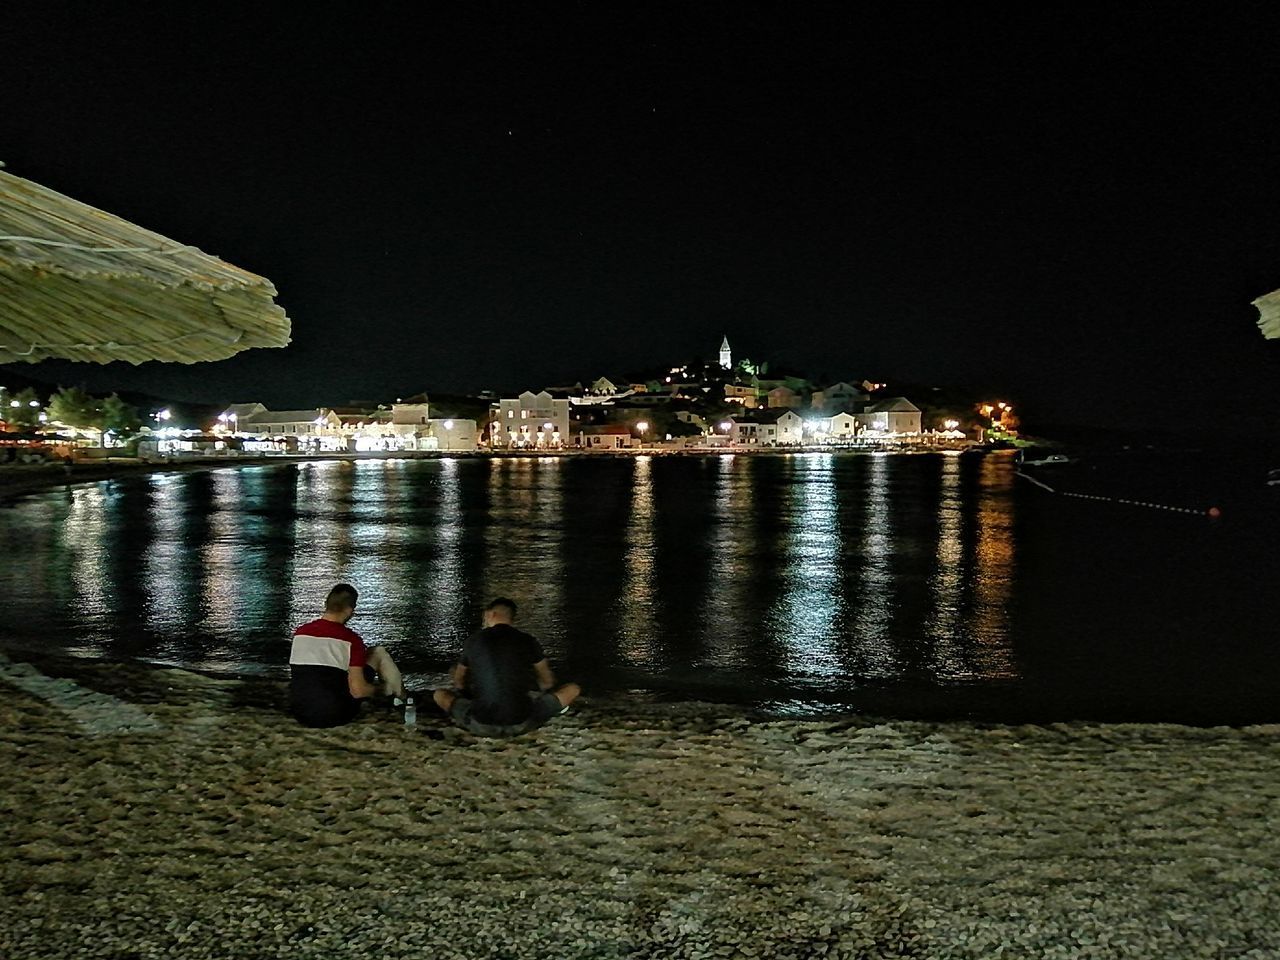 PEOPLE SITTING BY RIVER AGAINST ILLUMINATED CITY